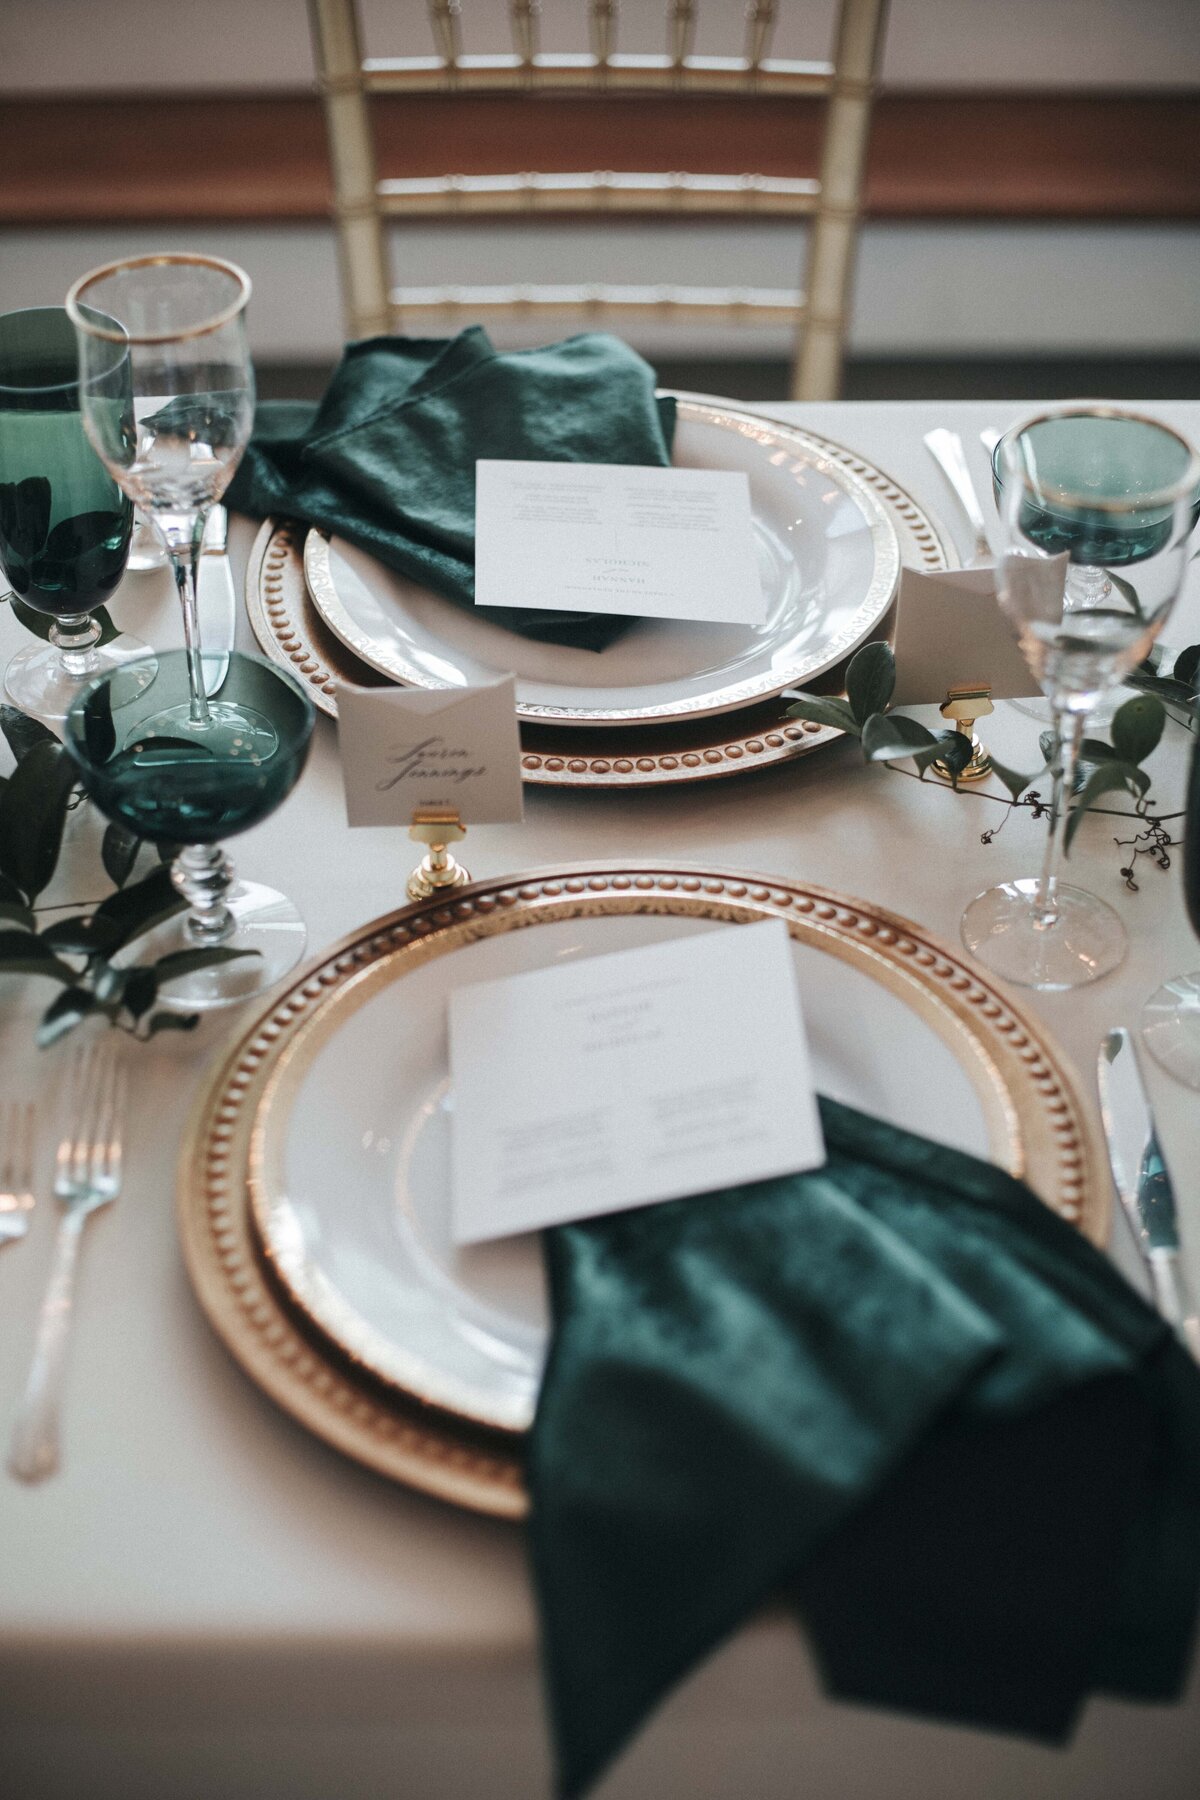 White squared place card with black font atop a dark green napkin and white plate.